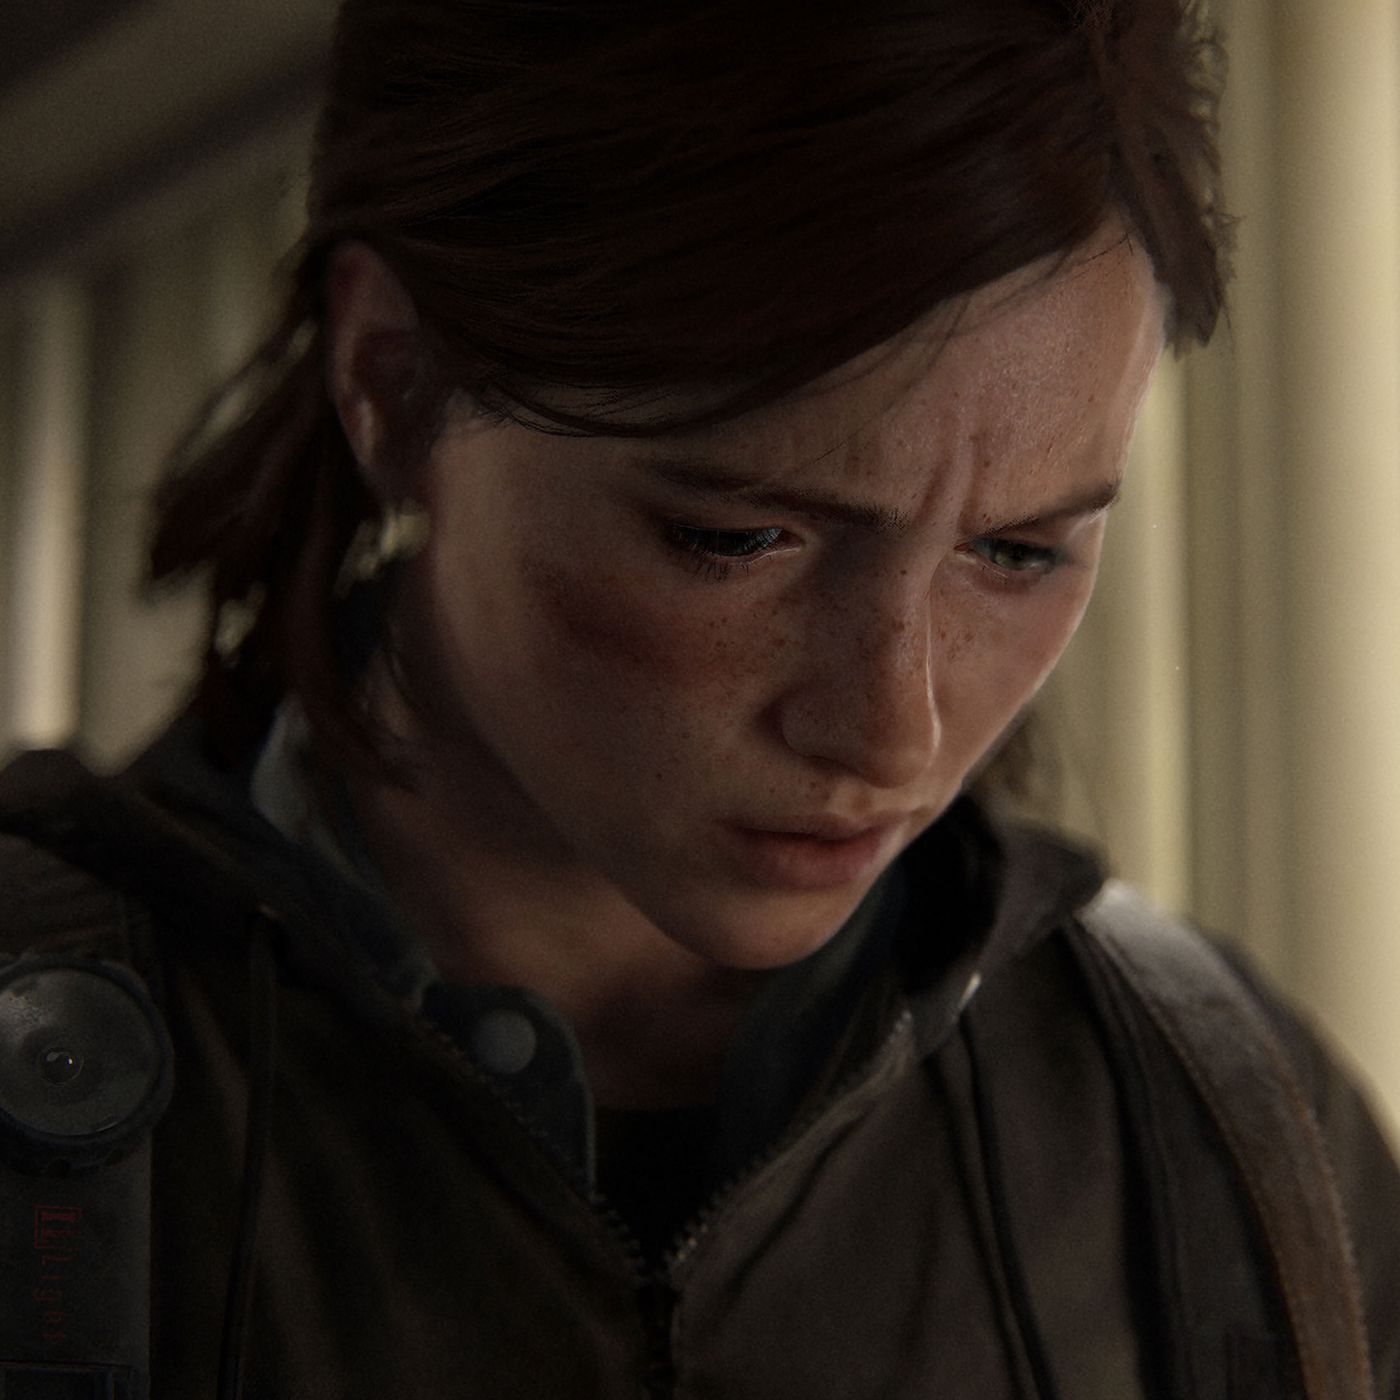 Two Gamers Played 'The Last of Us Part II.' They Were Blown Away